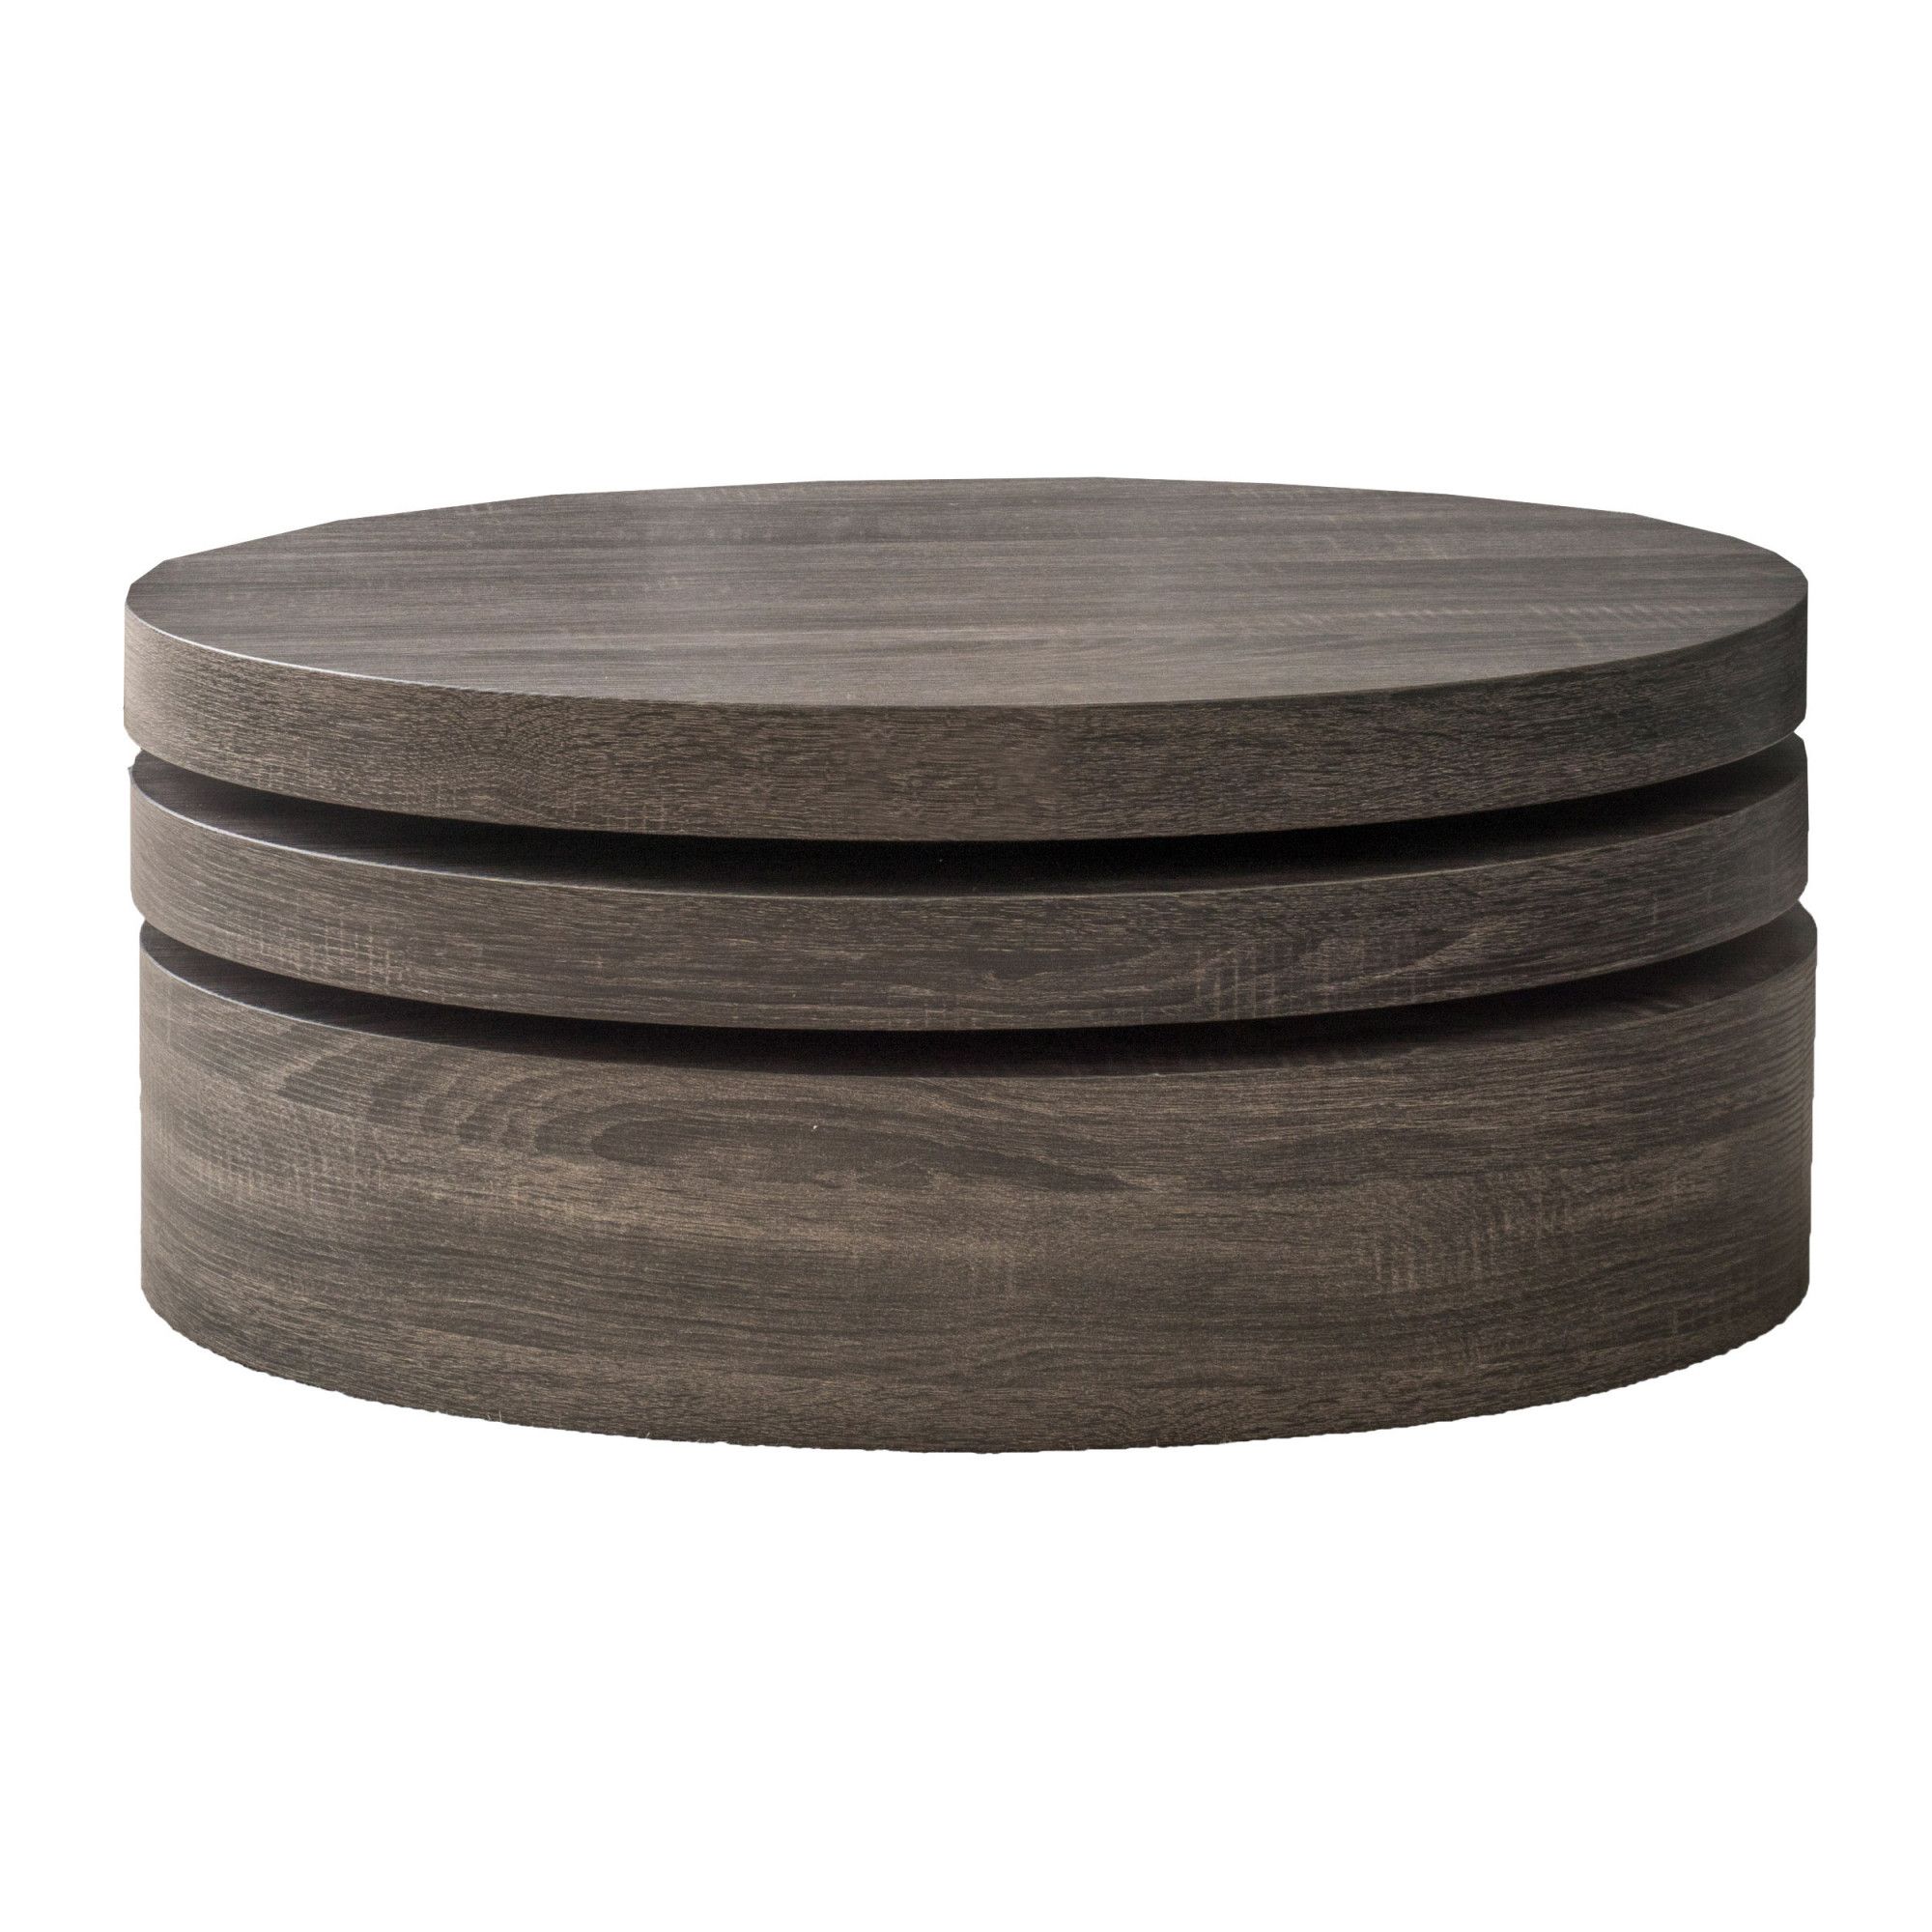 Small Oval Mod Rotatable Coffee Table In Black Sonoma Oaknoble House With Regard To Oval Mod Rotating Coffee Tables (View 16 of 20)